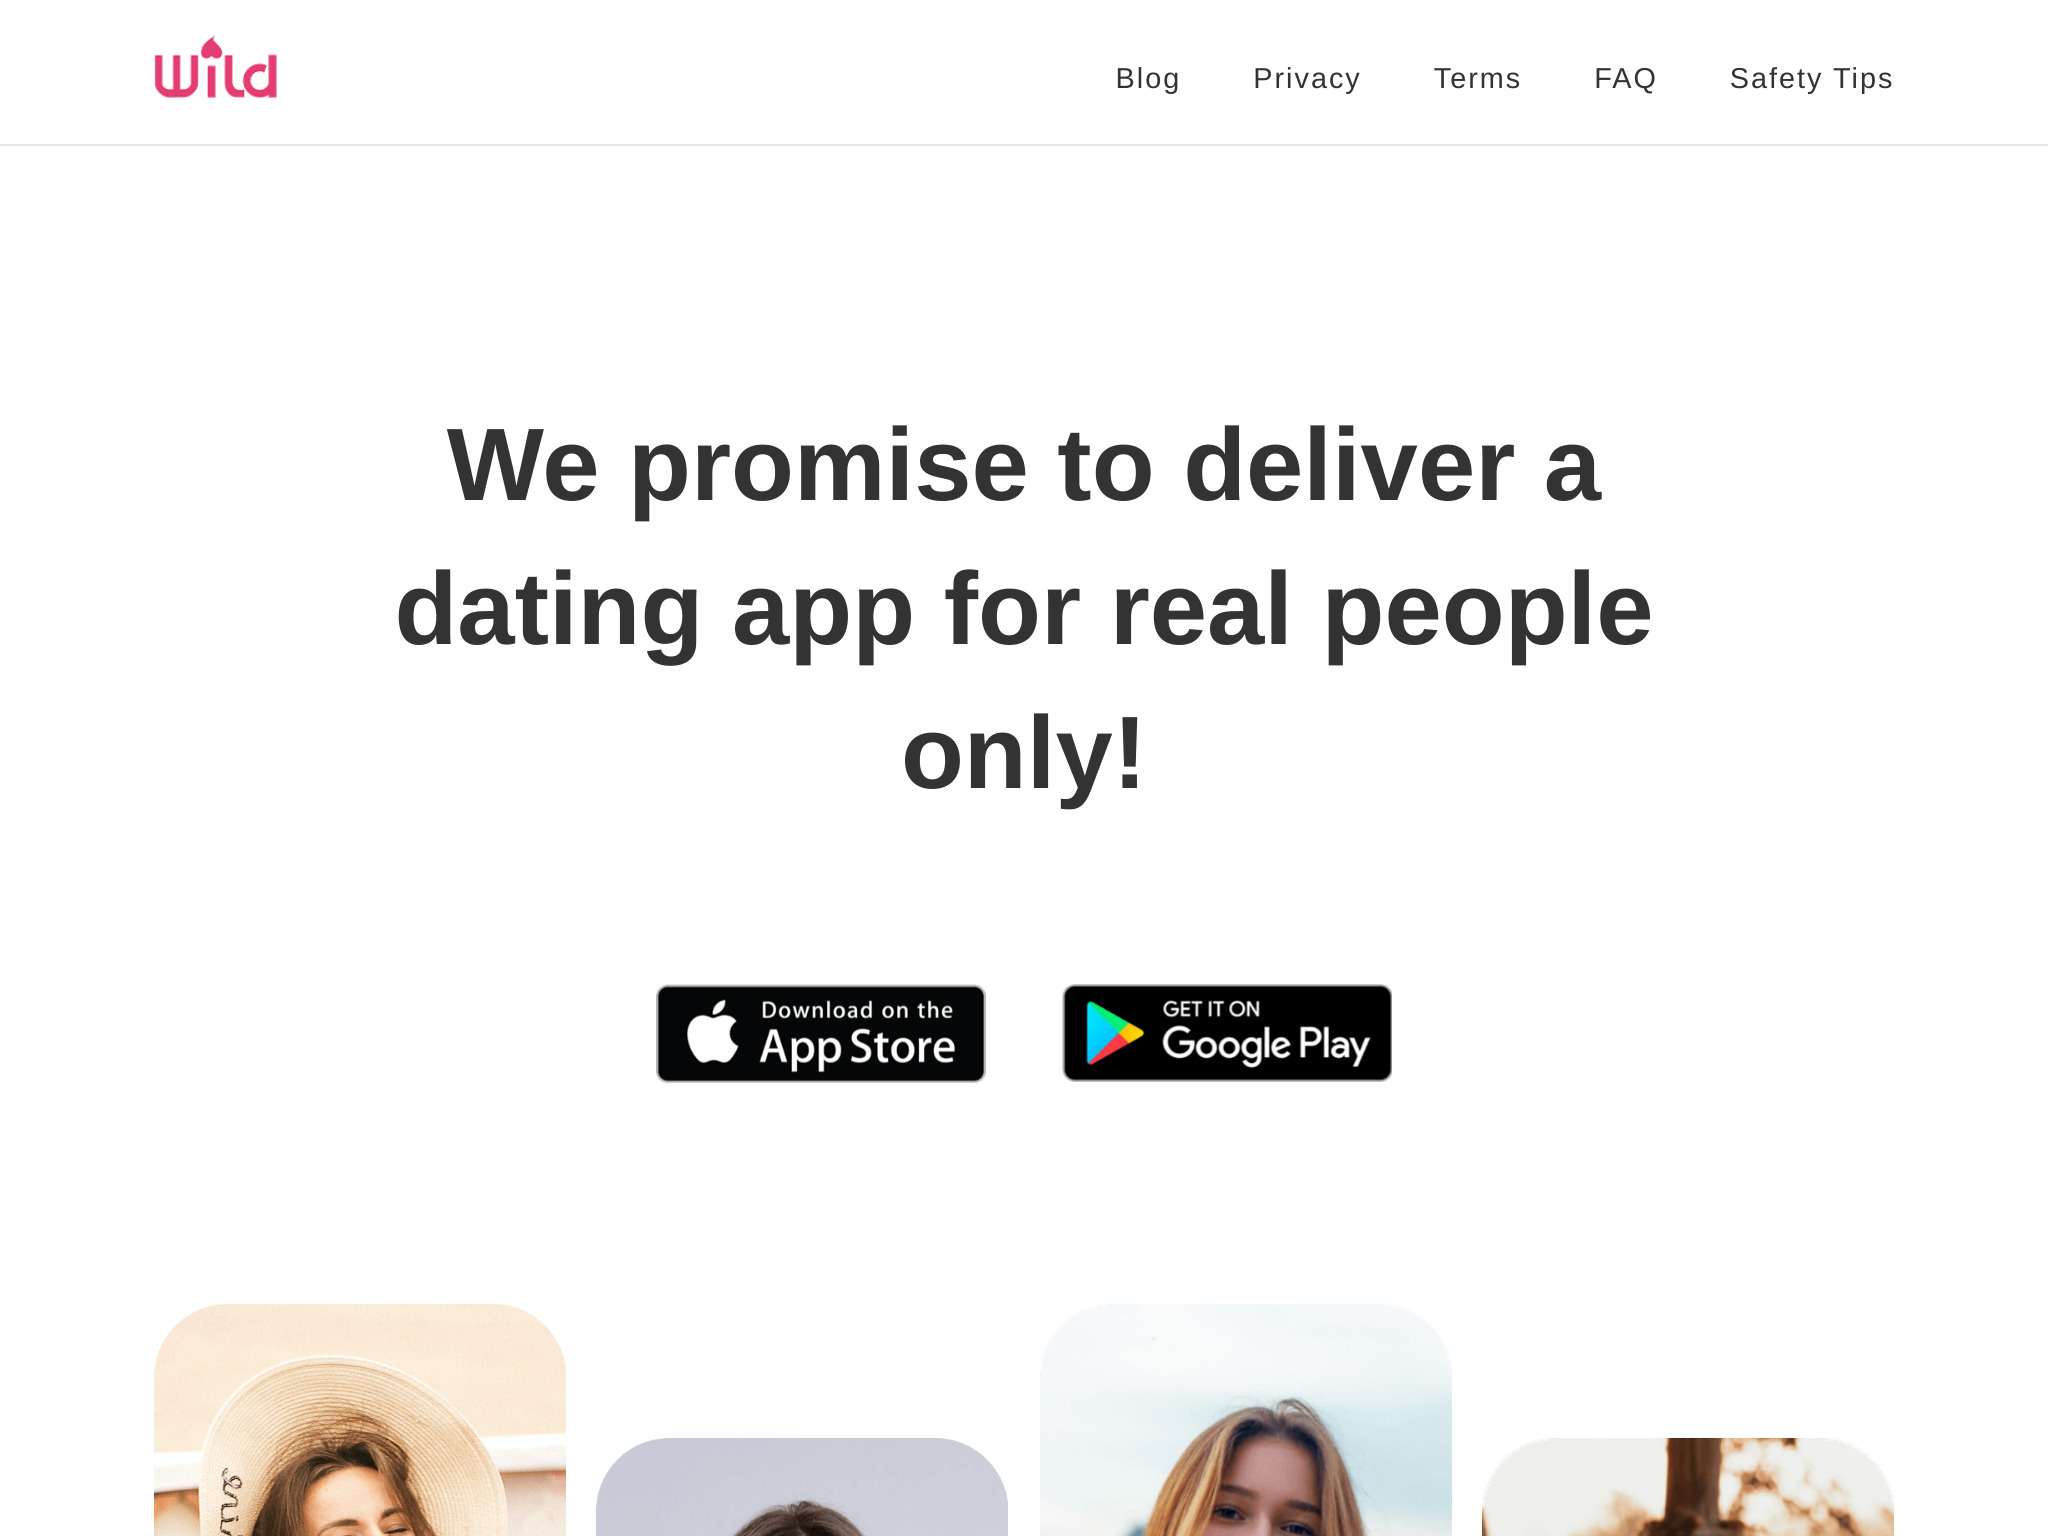 Finding Romance Online – 2023 Wild Review